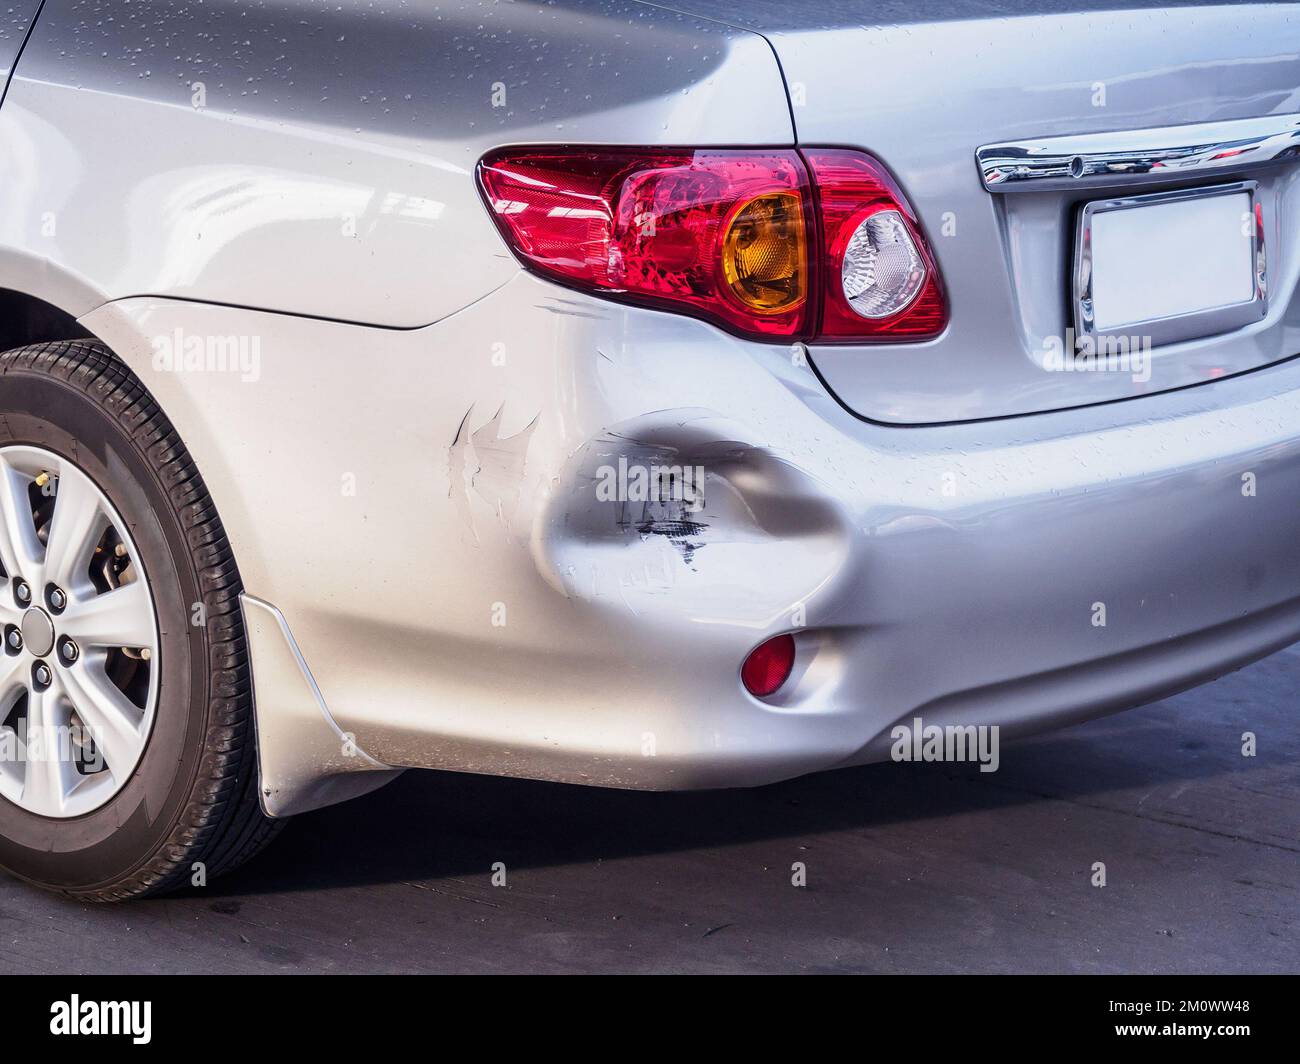 car has dented rear bumper damaged after accident Stock Photo